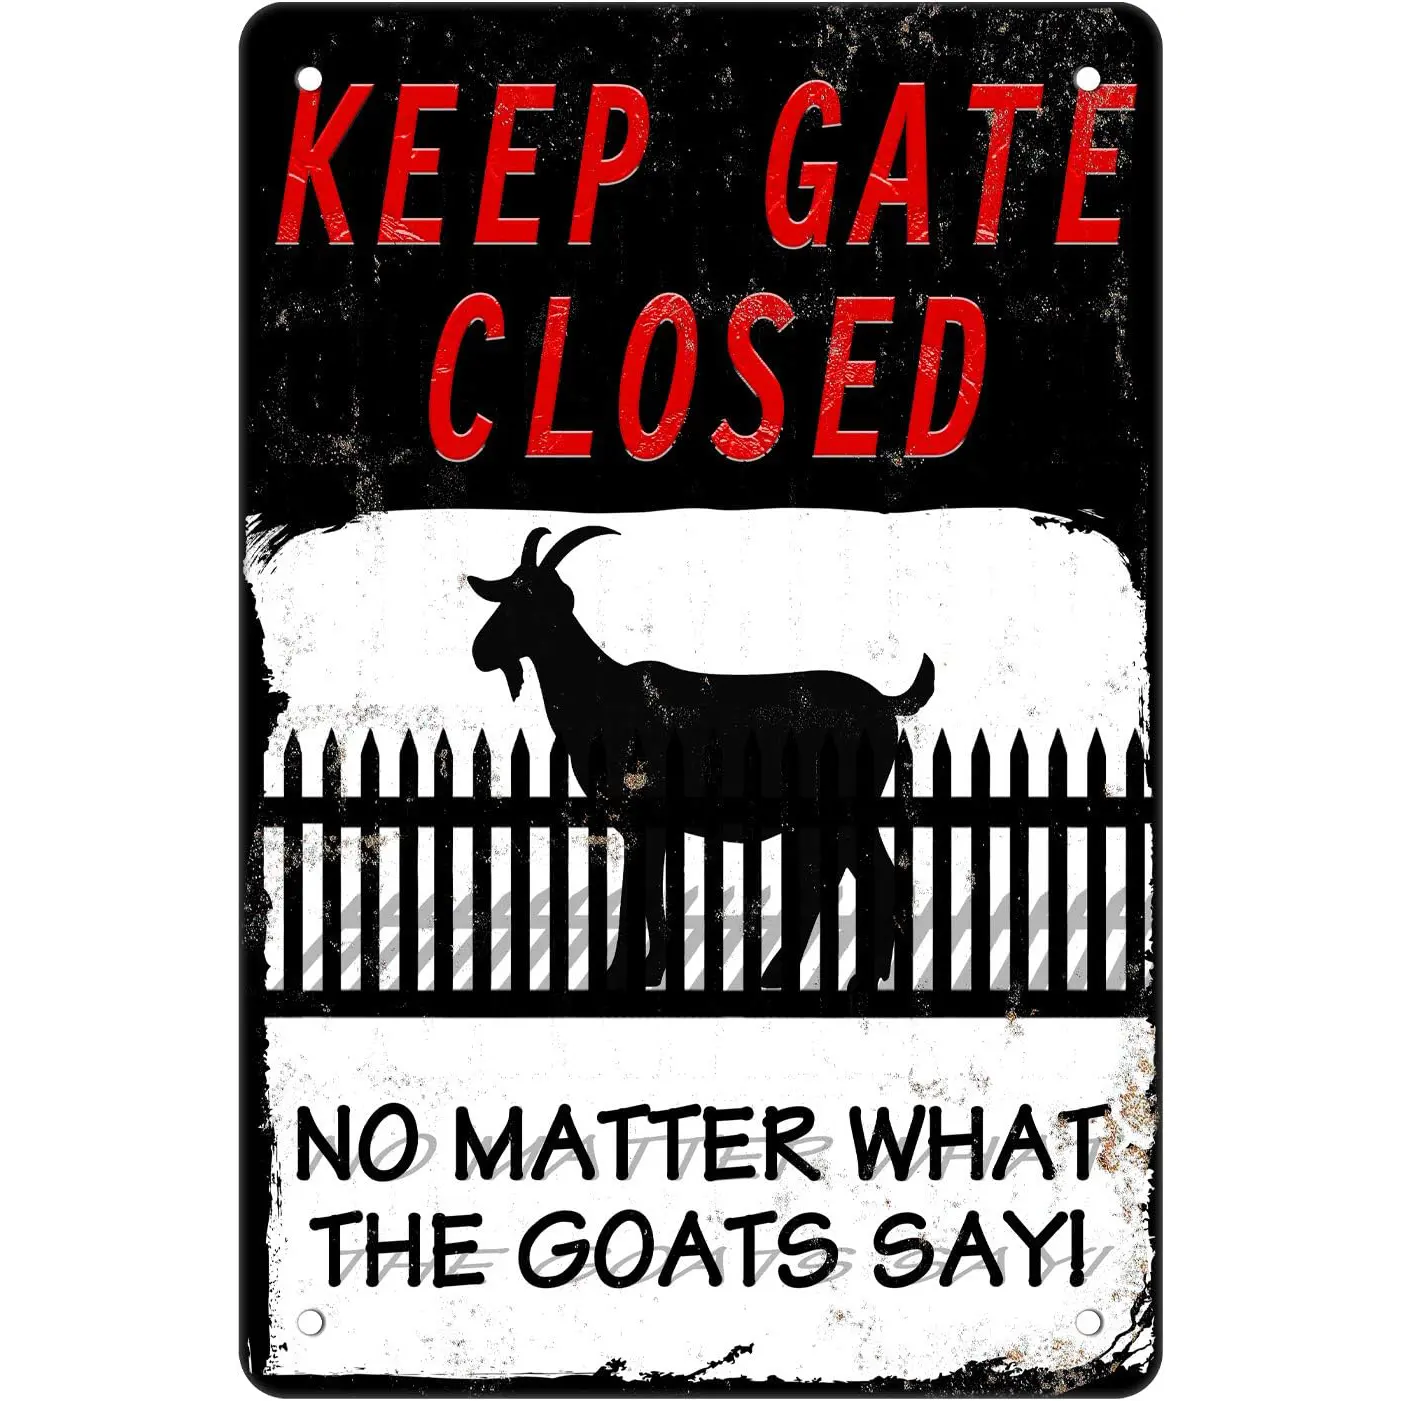 Warning Sign Goats -Keep the Gate Closed No Matter What the Goats Say 8x12inch Tin Sign Funny Caution Sign for Farmhouse